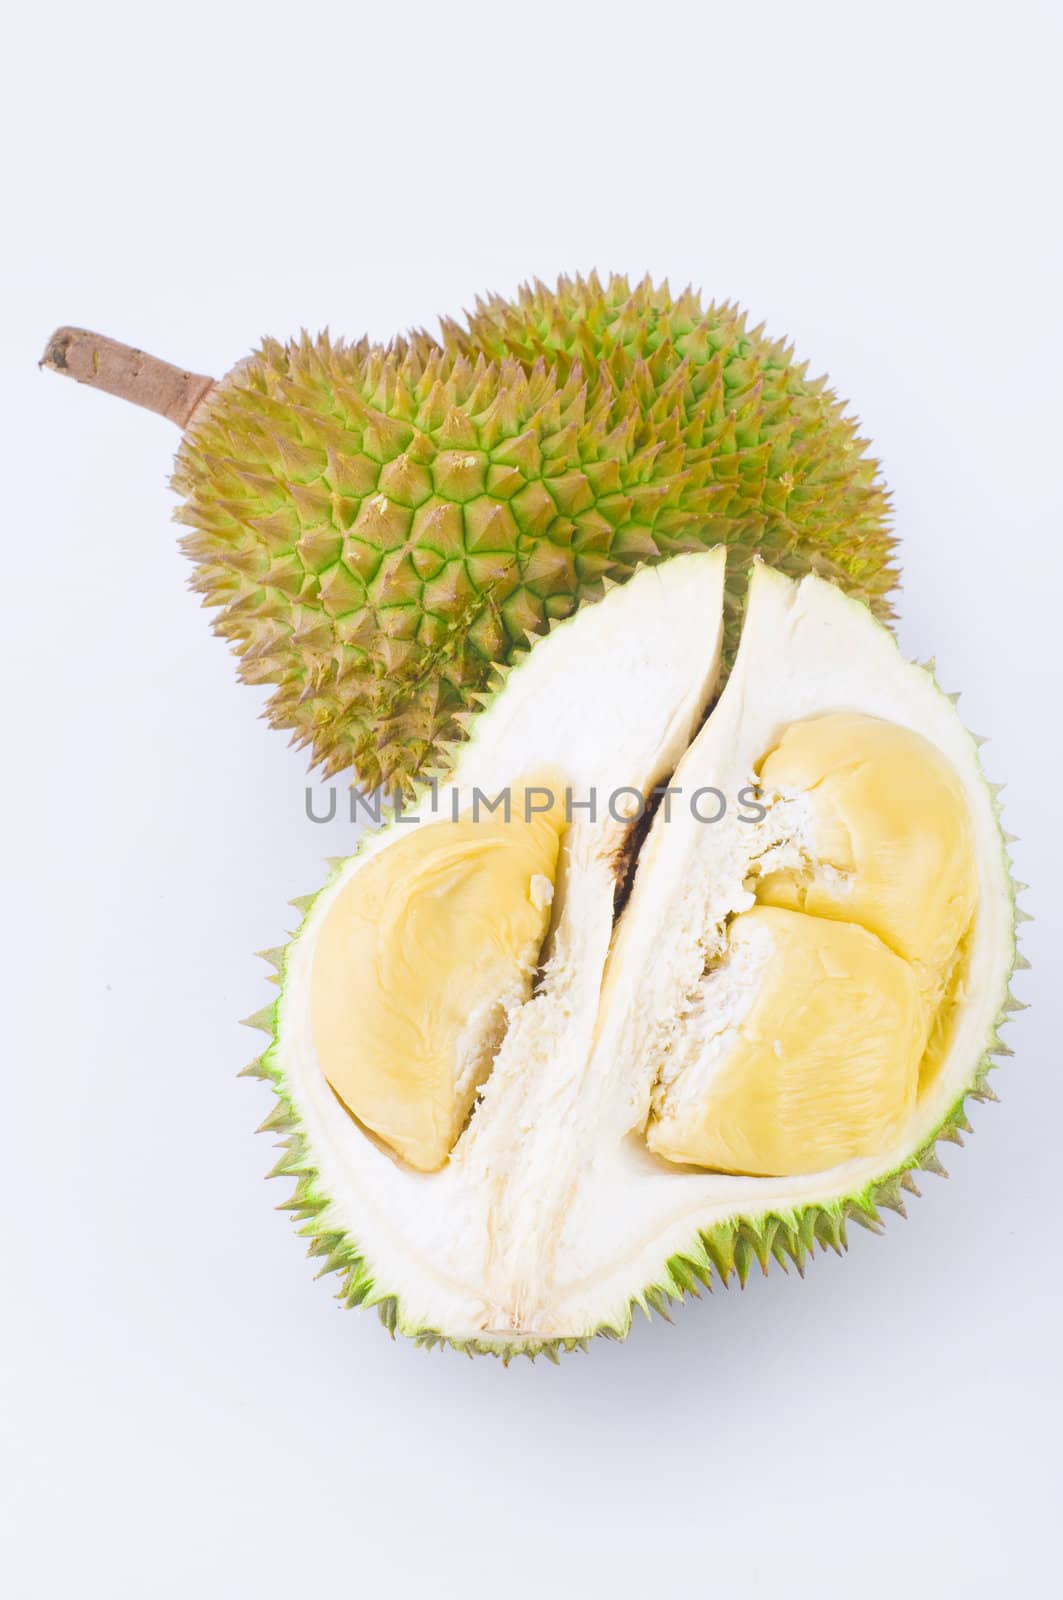 durian the king of fruits